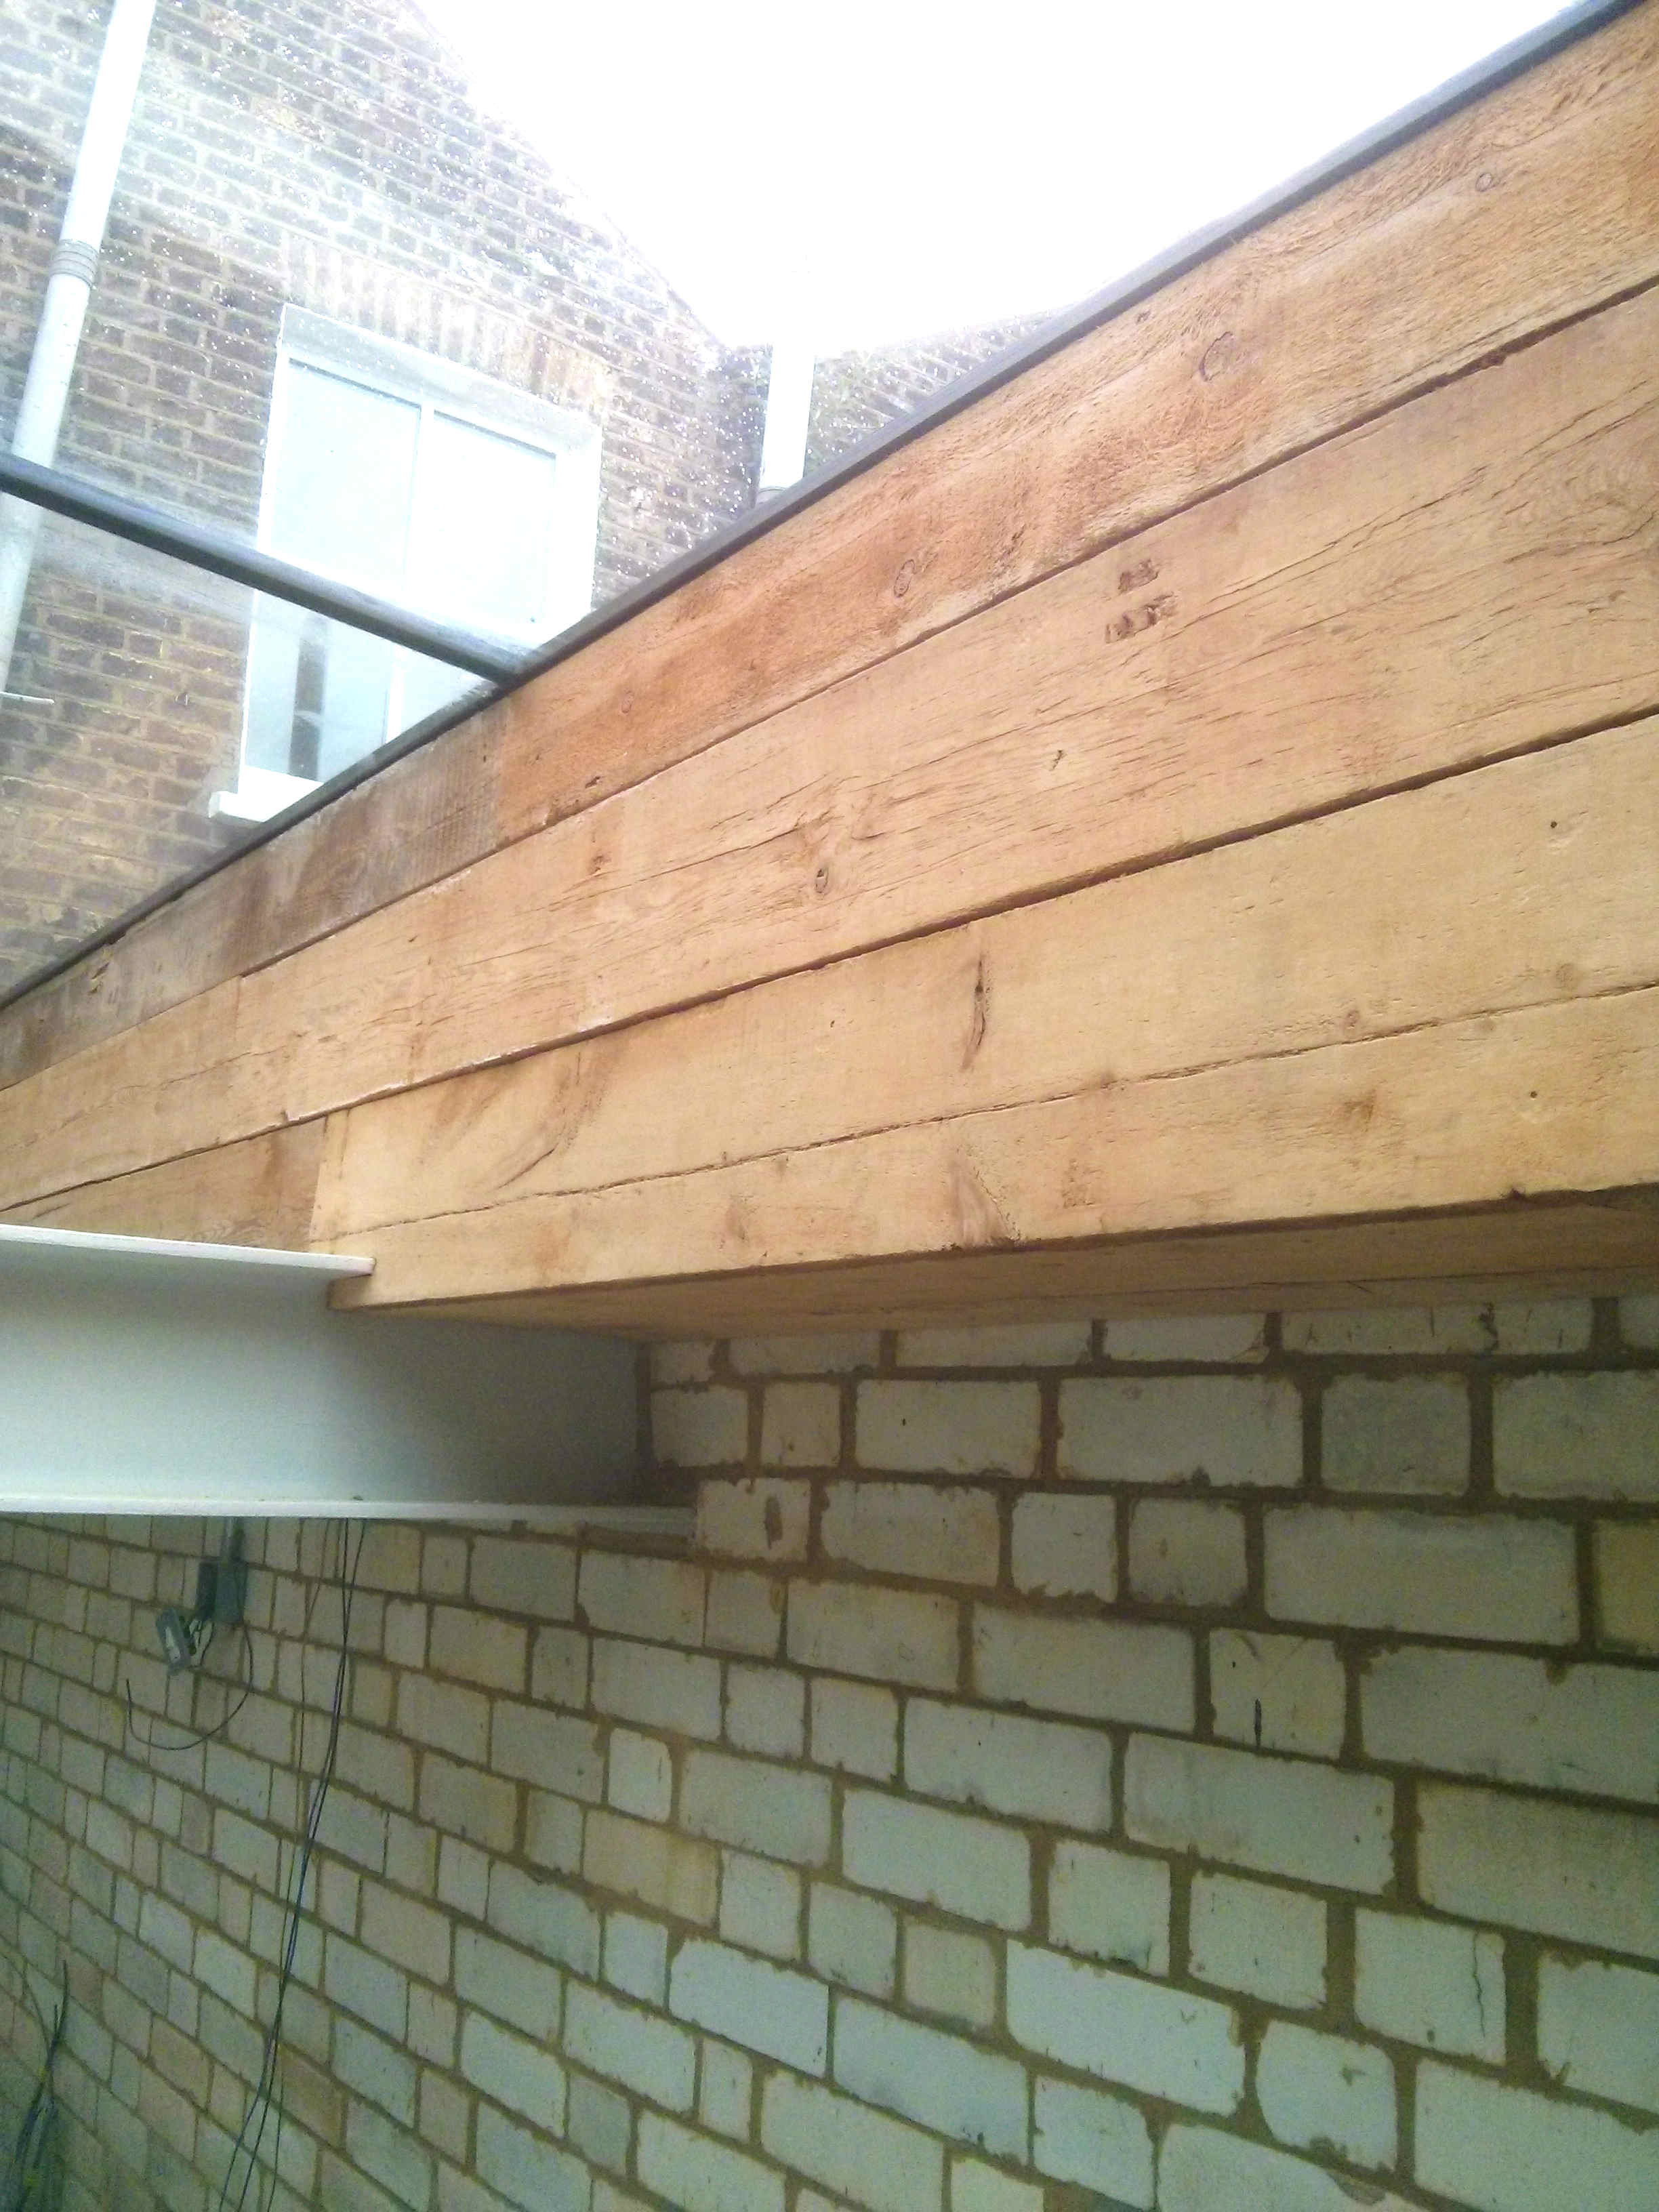 Reclaimed bricks and cladding looking great